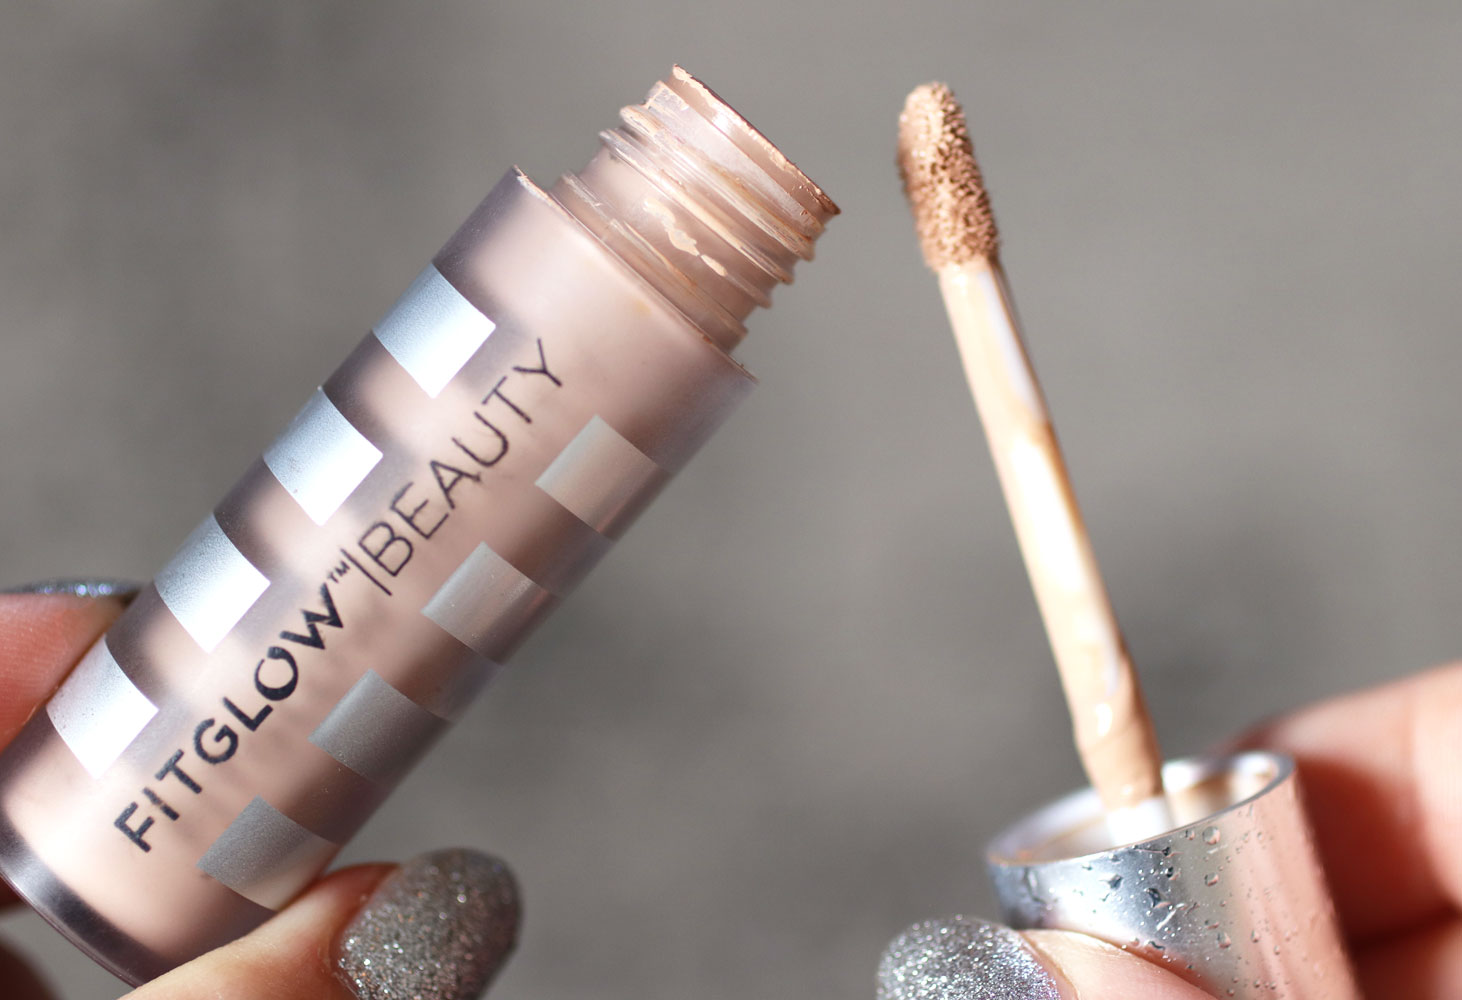 Best cruelty free concealers guide - Fitglow Beauty concealer review